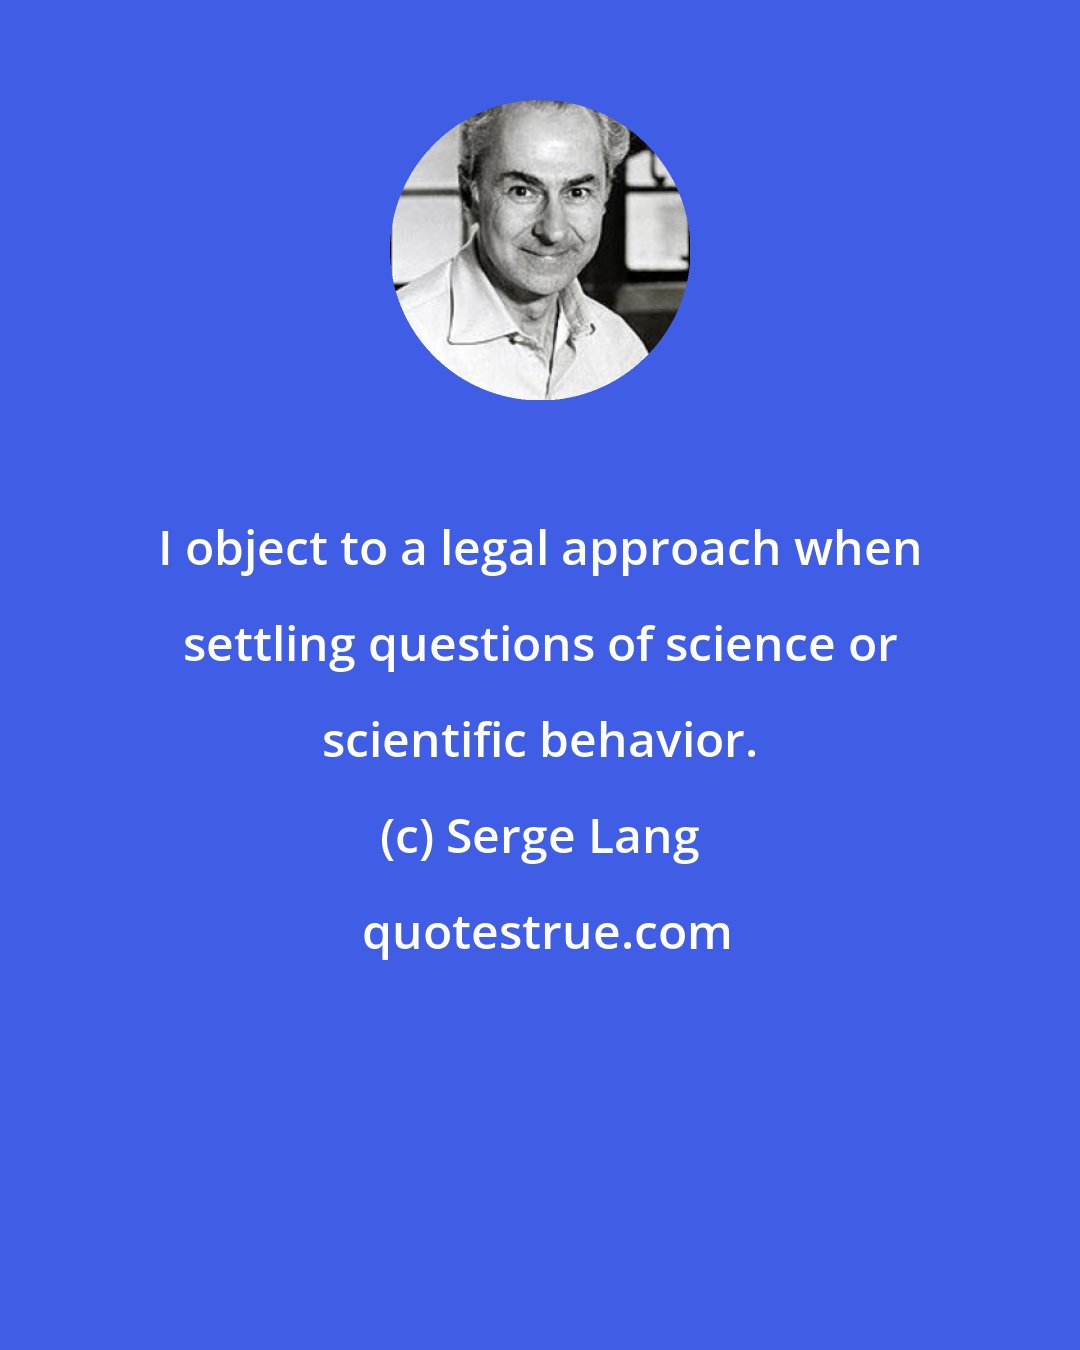 Serge Lang: I object to a legal approach when settling questions of science or scientific behavior.